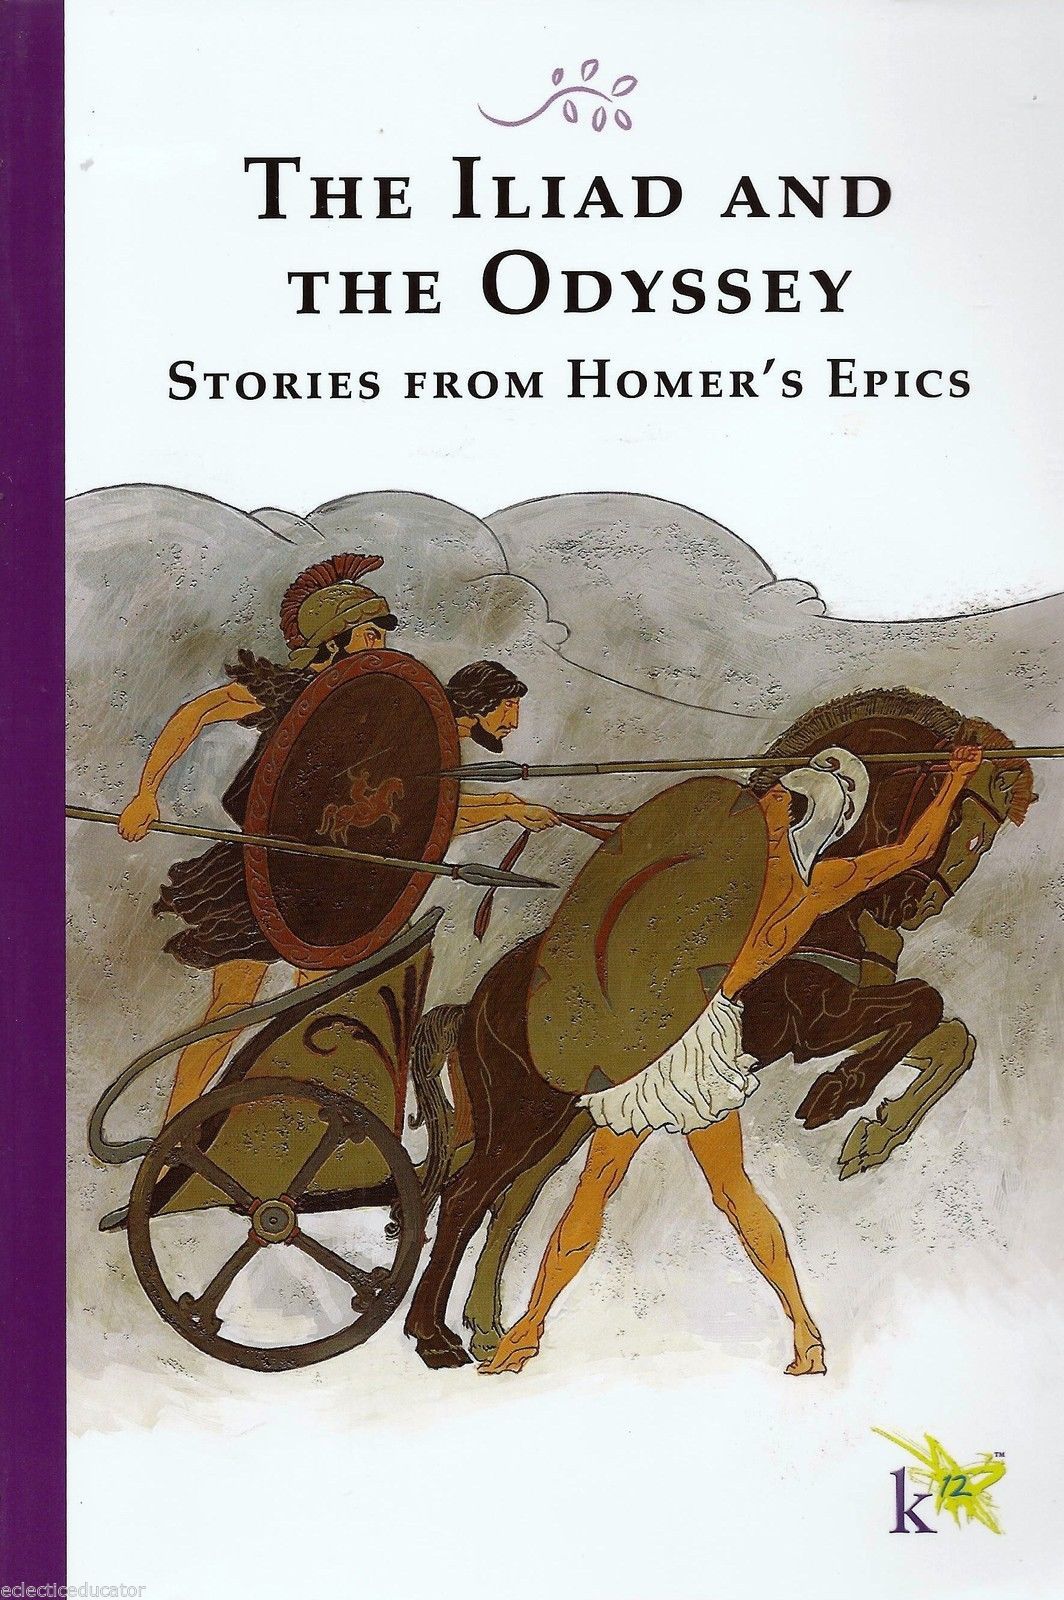 the story of iliad and odyssey